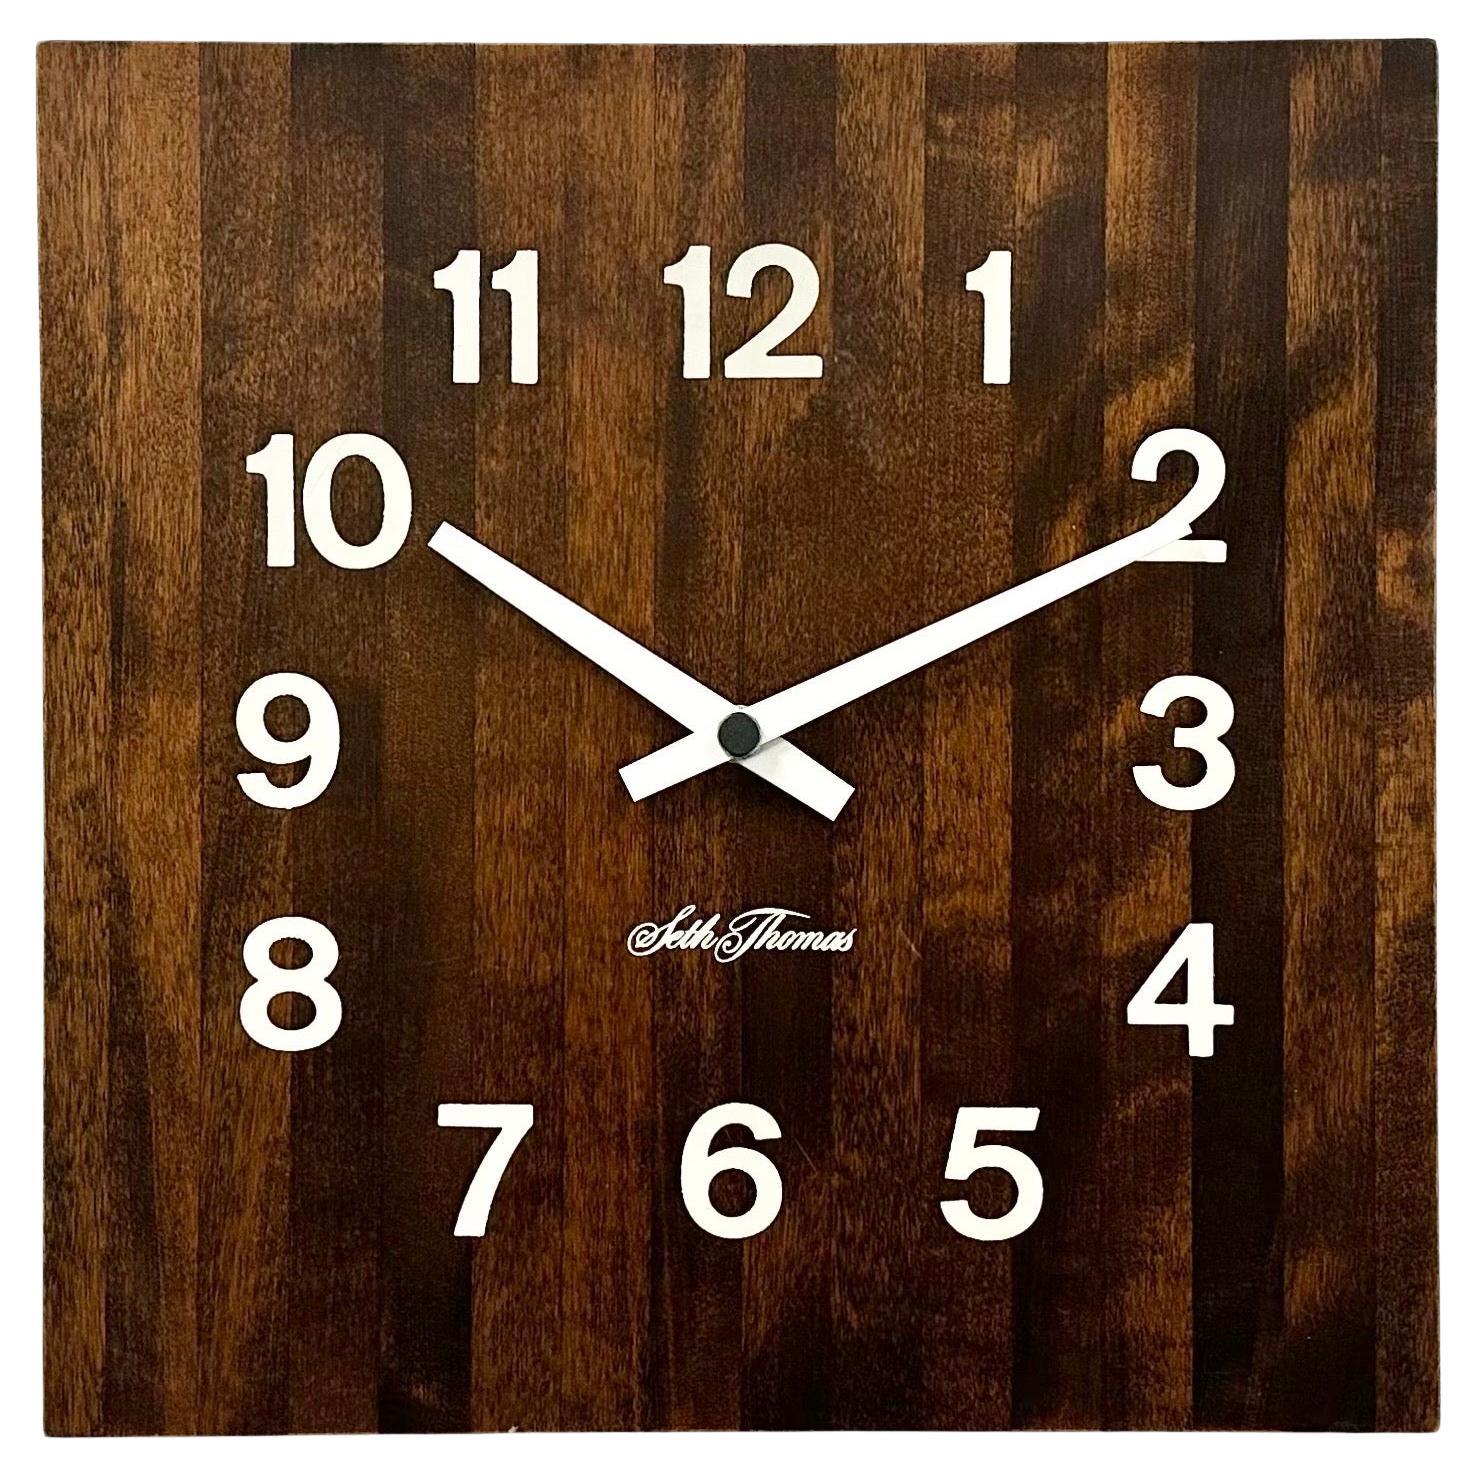 Is the Seth Thomas Clock Company still in business?